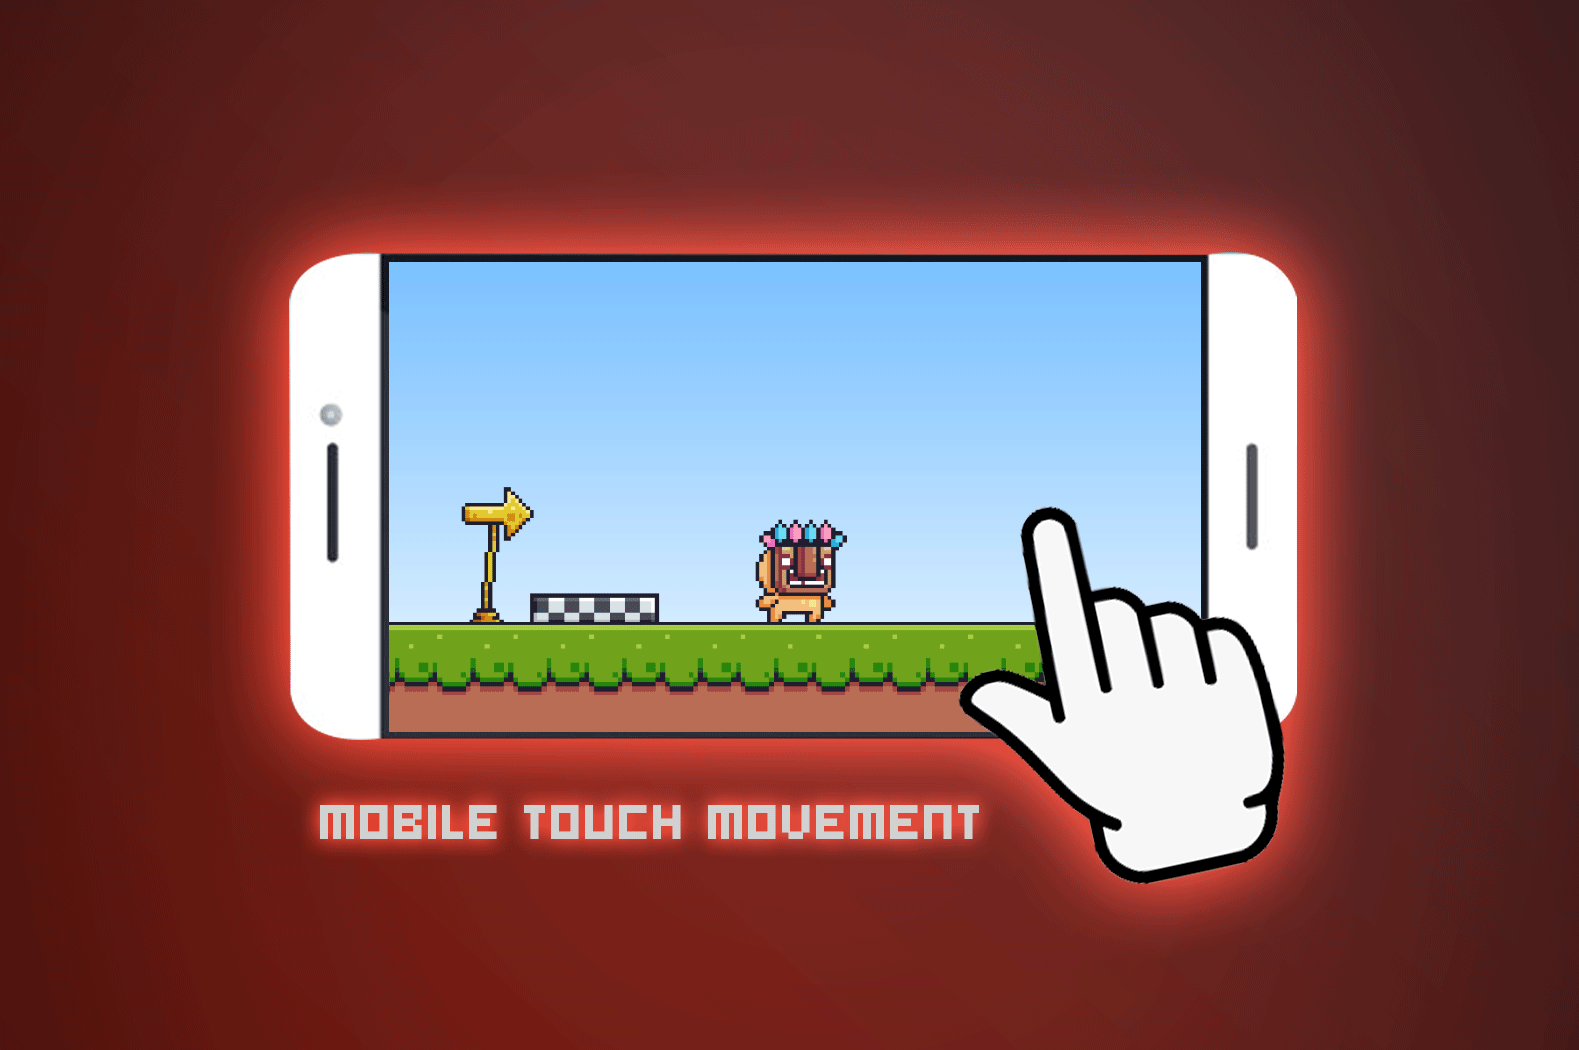 Unity Tutorials: How to Make Mobile Touch Movements